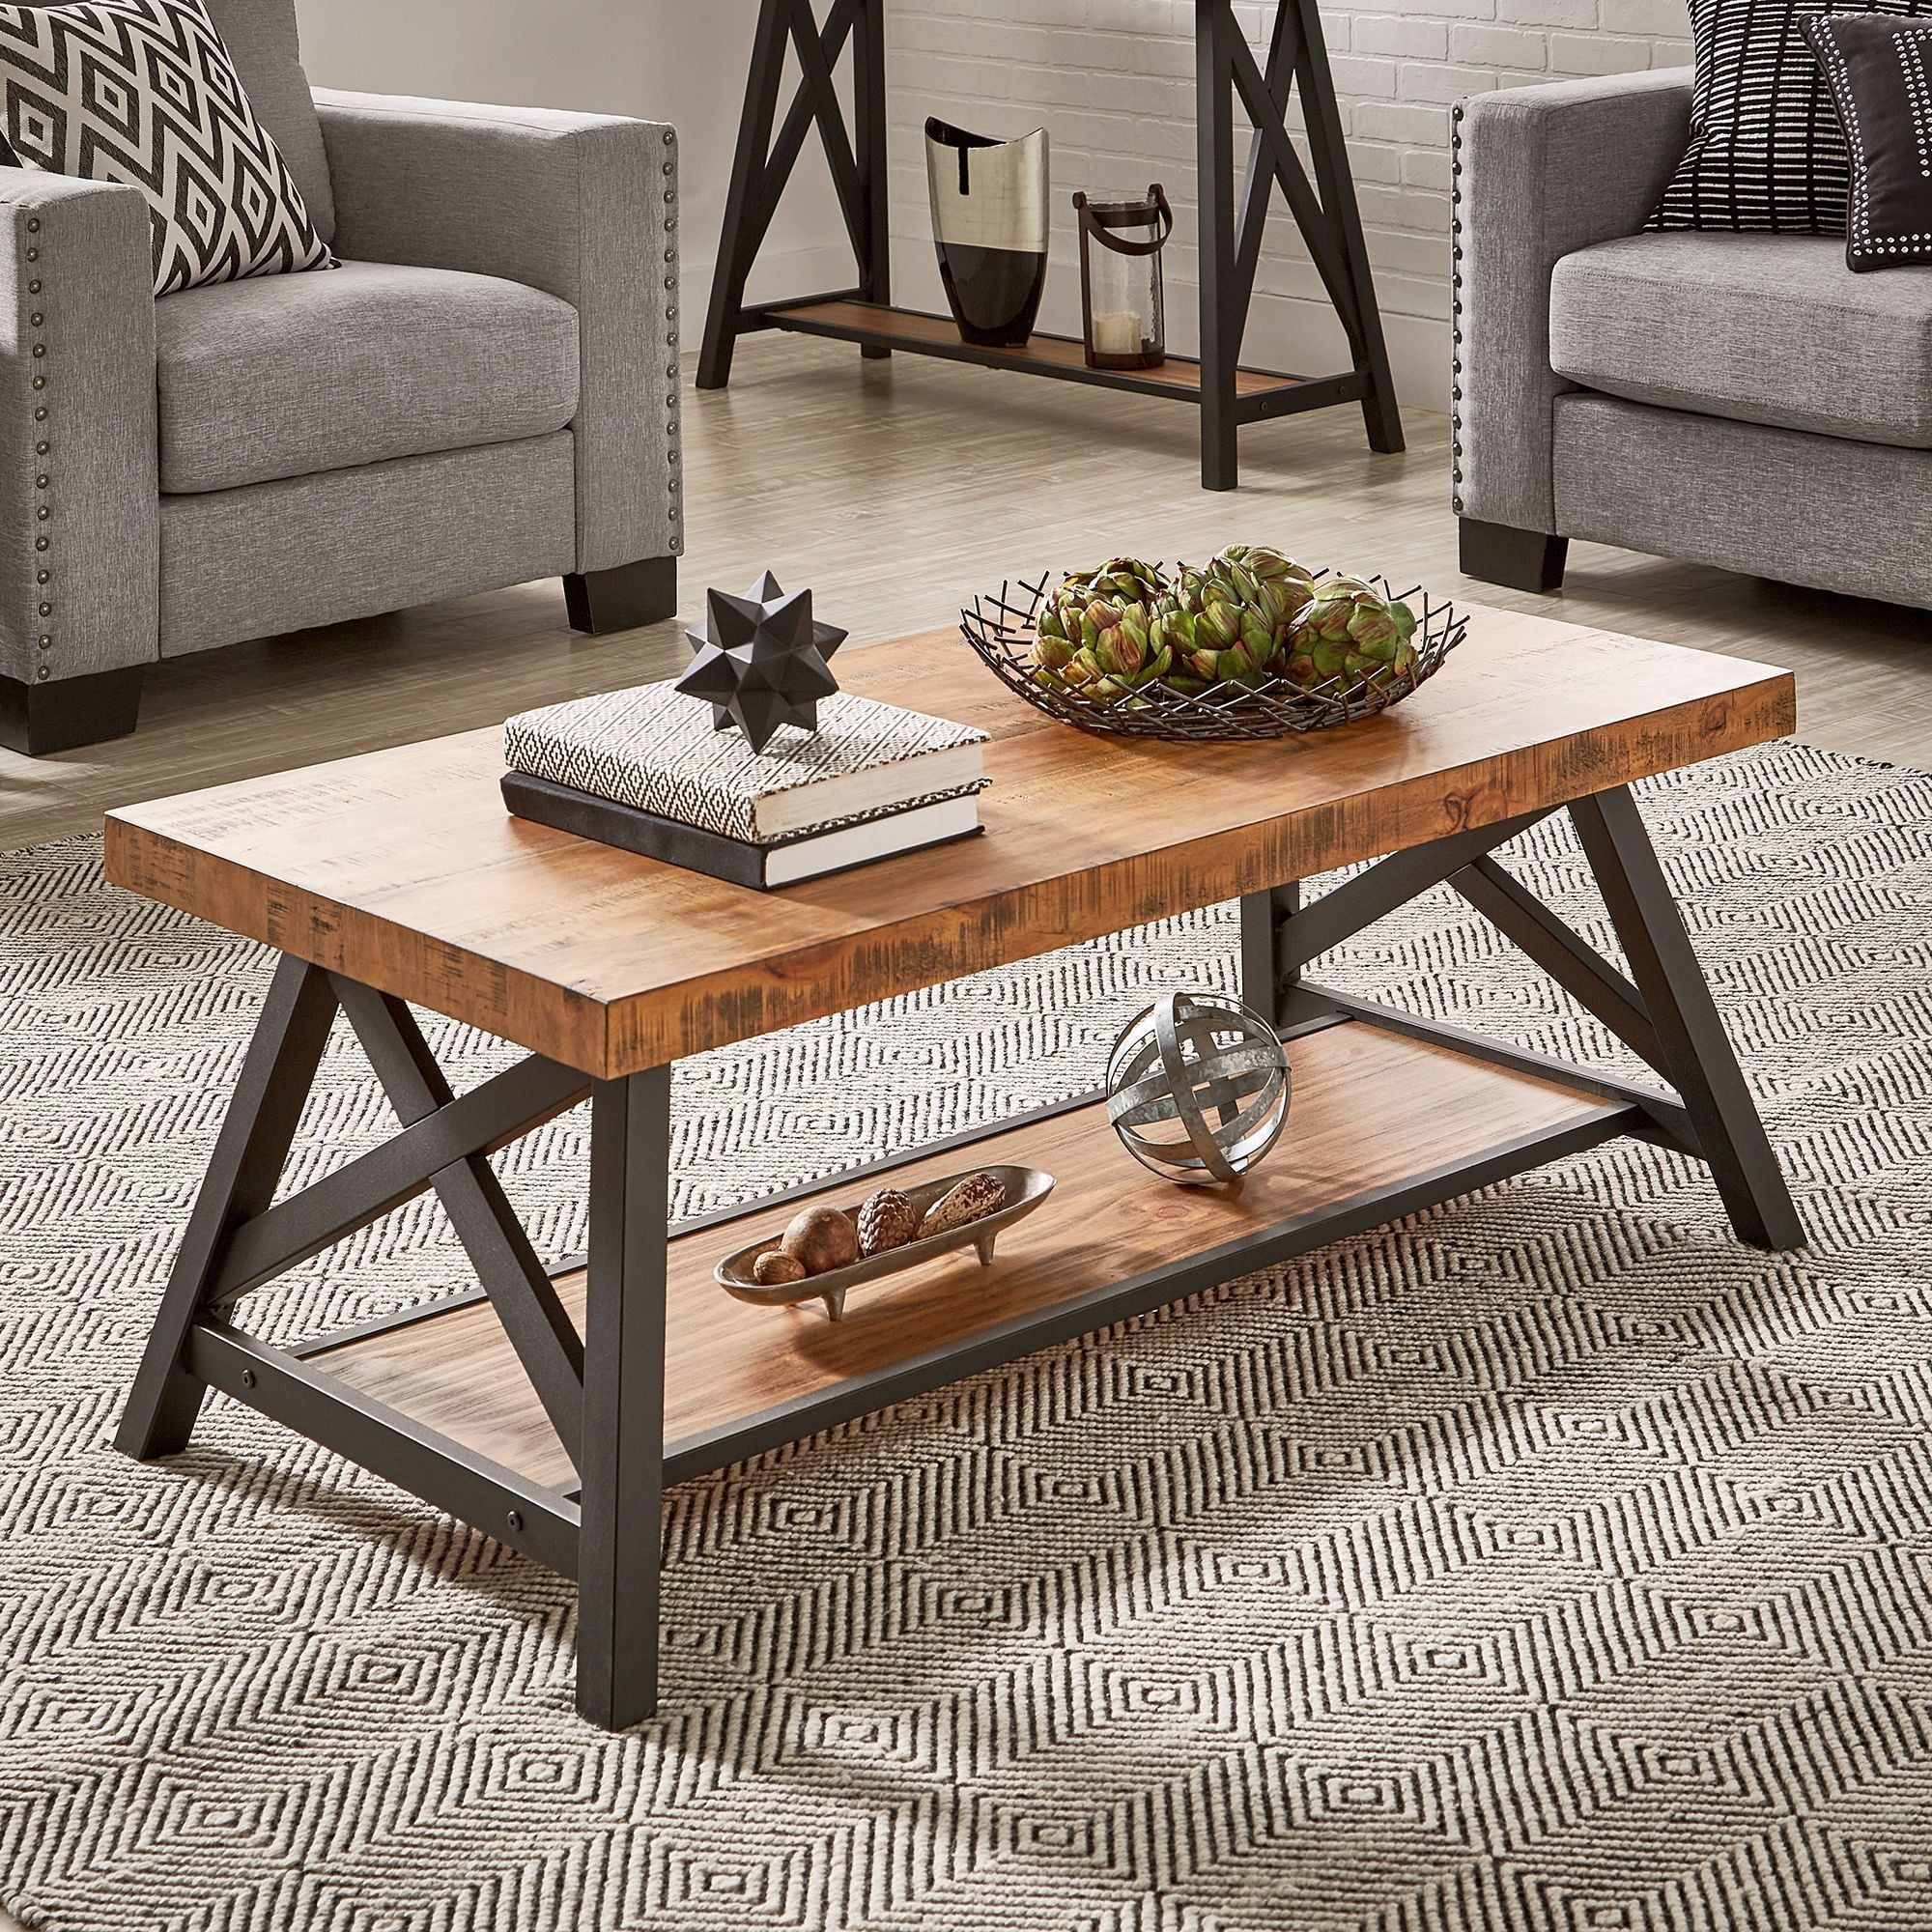 Weston Home Westyn Rustic X Base Wood Rectangular Coffee Table, Gray –  Walmart For Rustic Wood Coffee Tables (View 10 of 15)